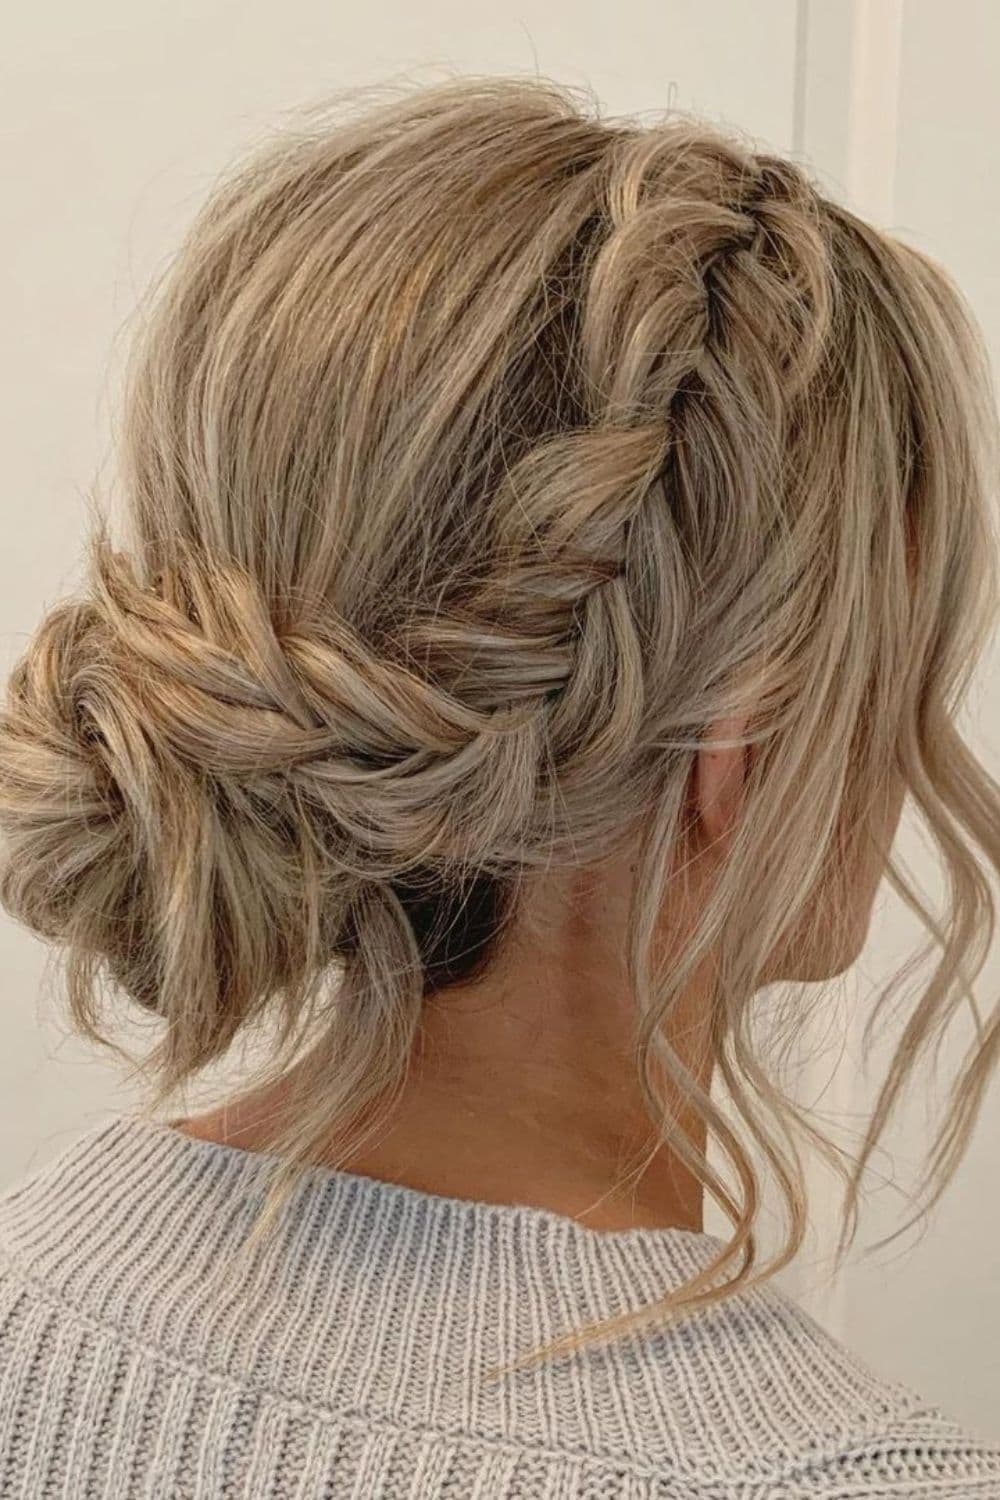 Side view of a woman with blonde updo fishtail braids.